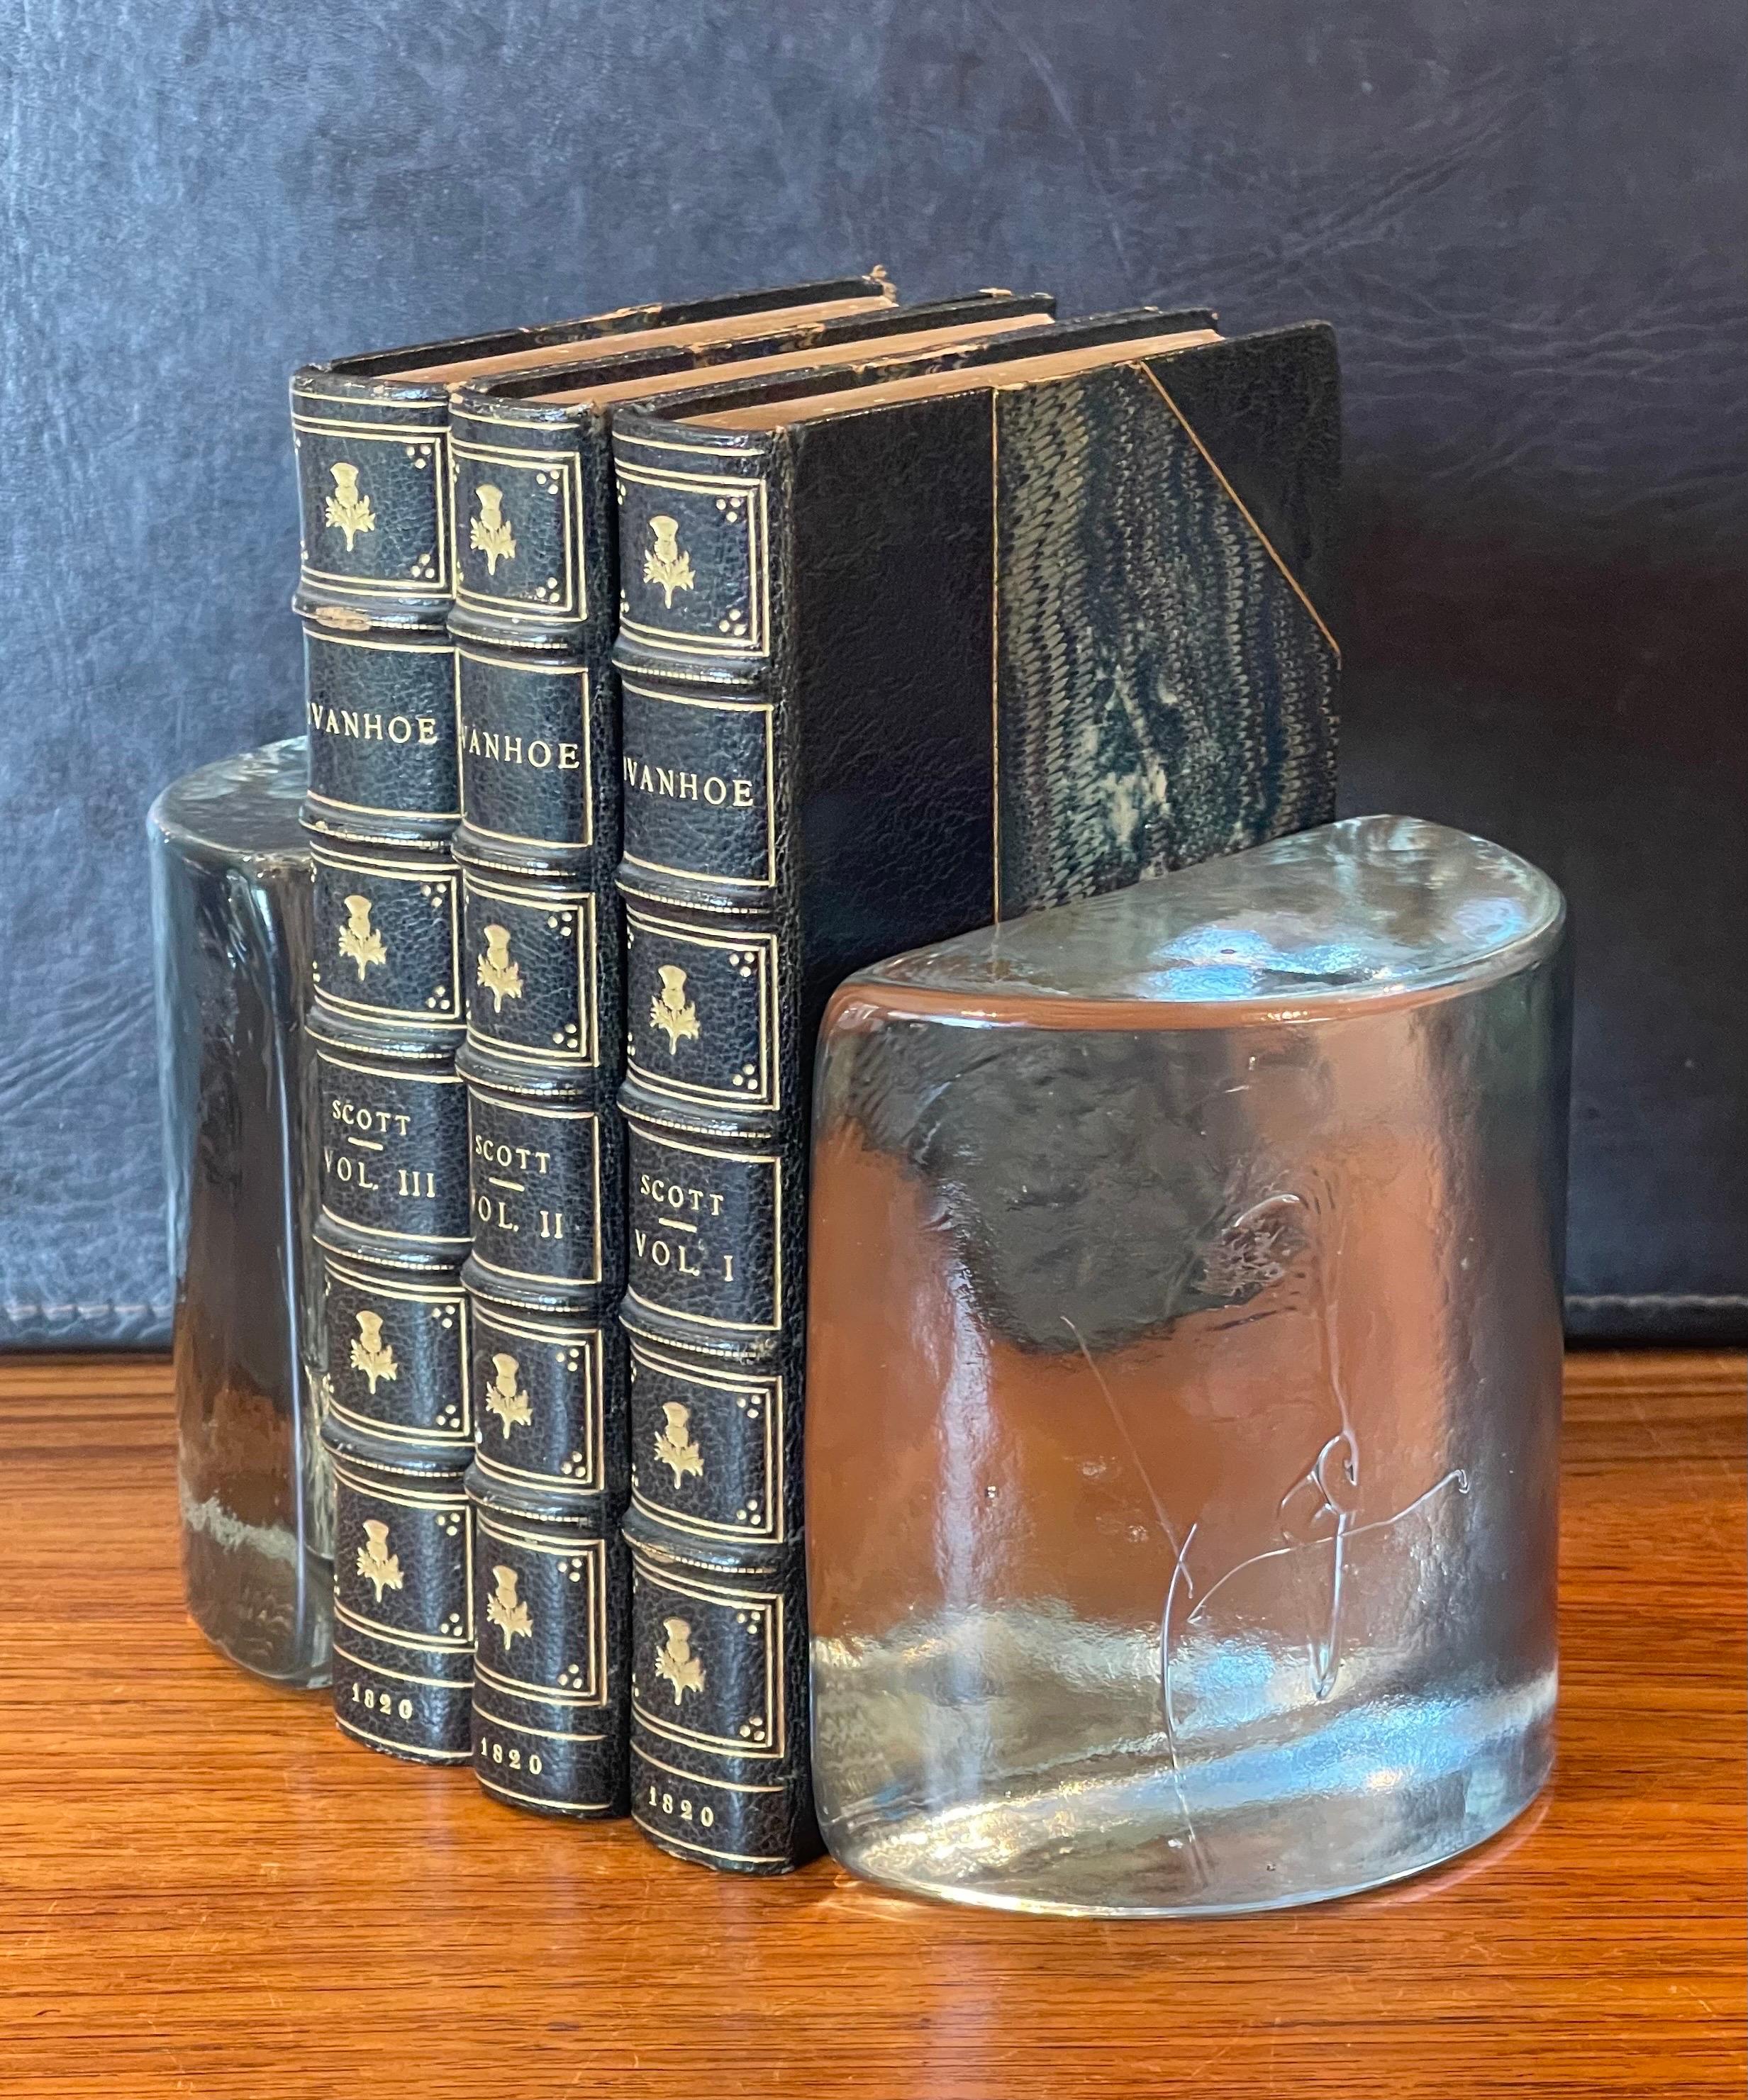 Gorgeous clear glass half moon bookends designed by Wayne Husted for Blenko, circa 1960s. They are in very good vintage condition with no chips or scratches.   The pair are 5